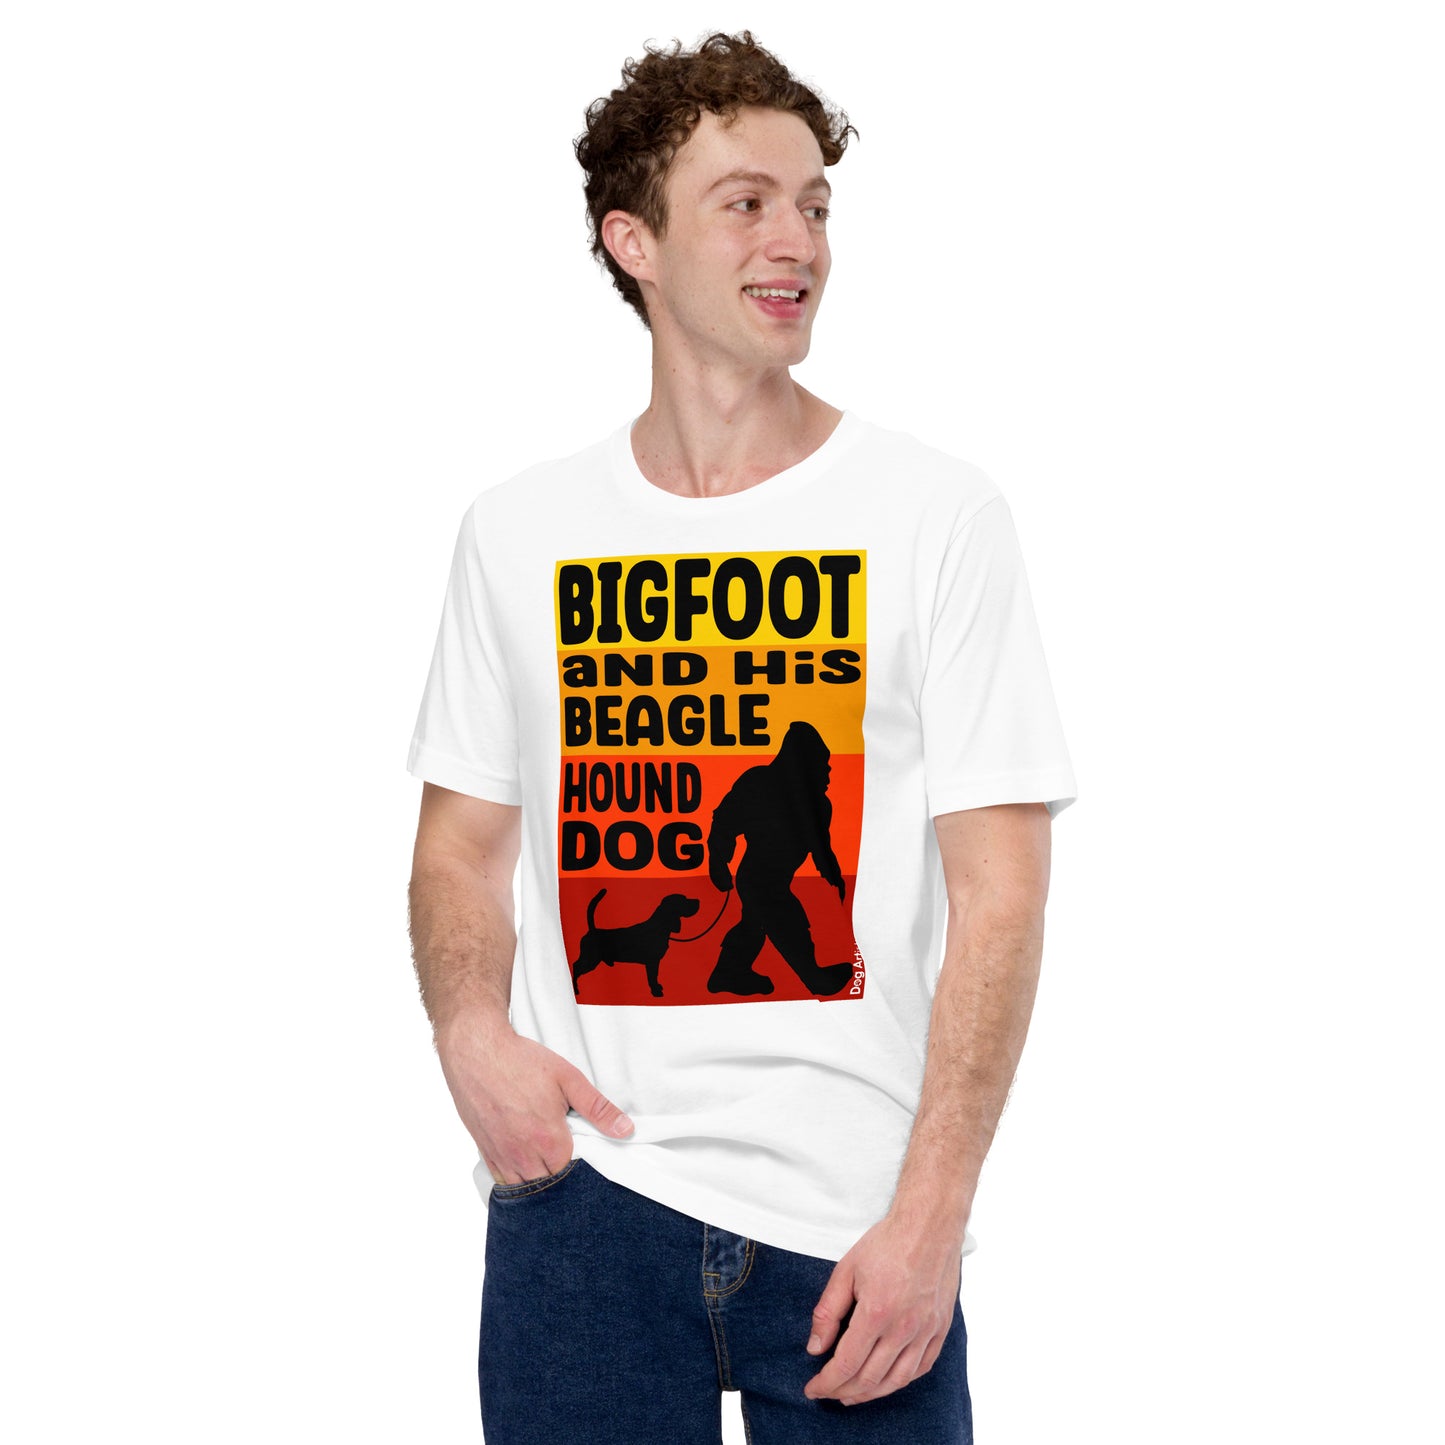 Big foot and his Beagle unisex white t-shirt by Dog Artistry.